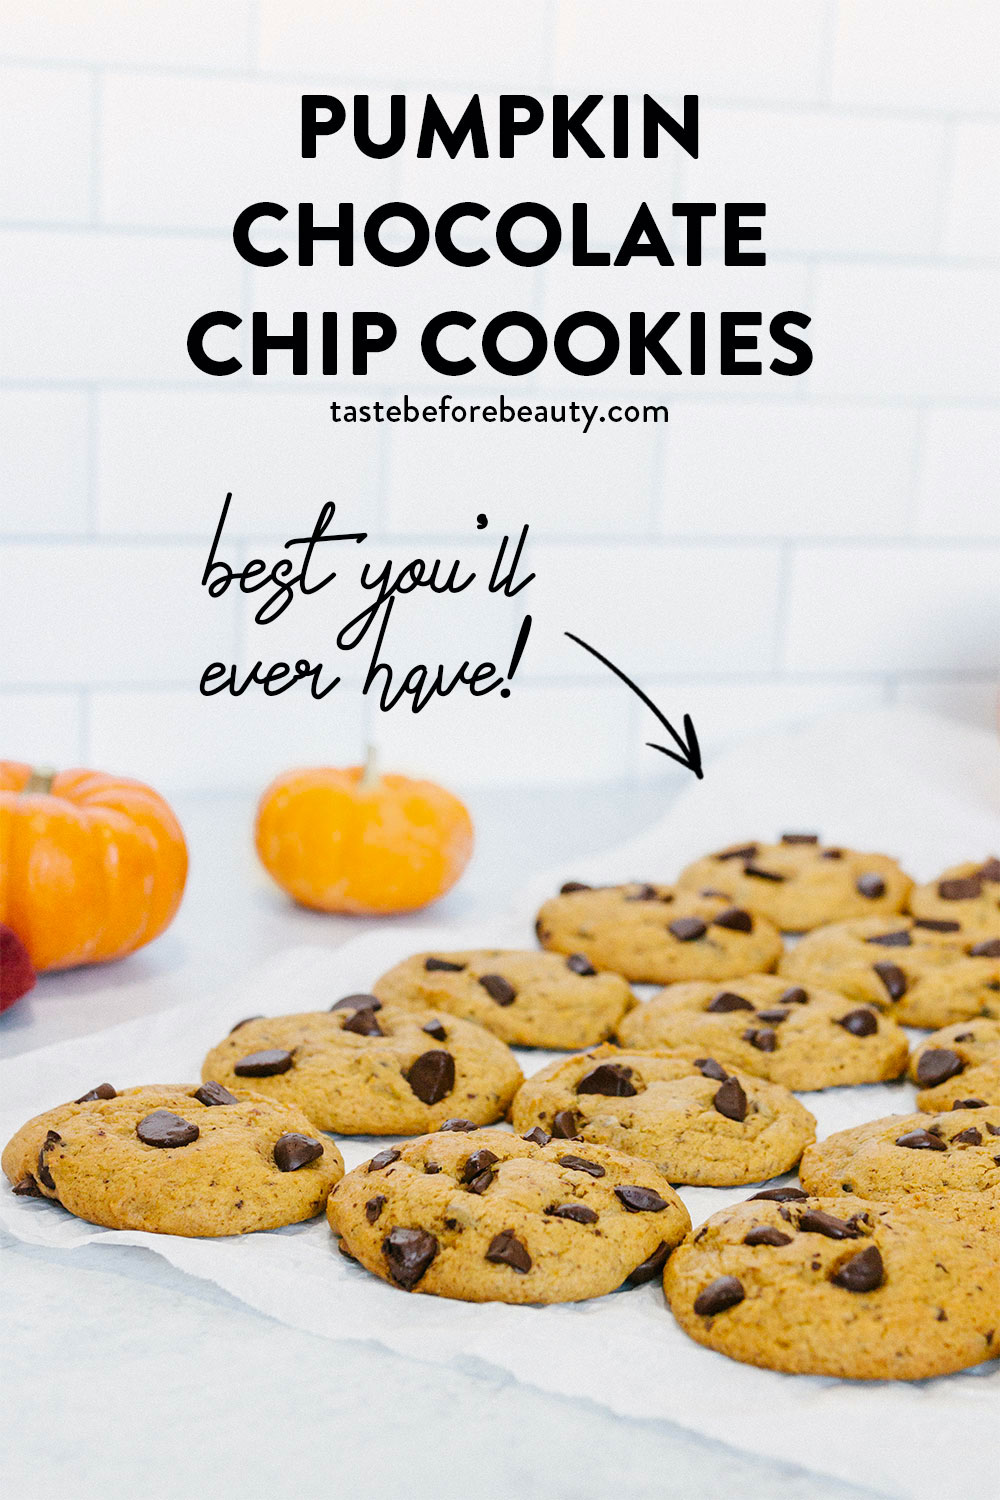 taste before beauty pumpkin chocolate chip cookies on parchment paper with chocolate chips and pumpkins pinterest pin